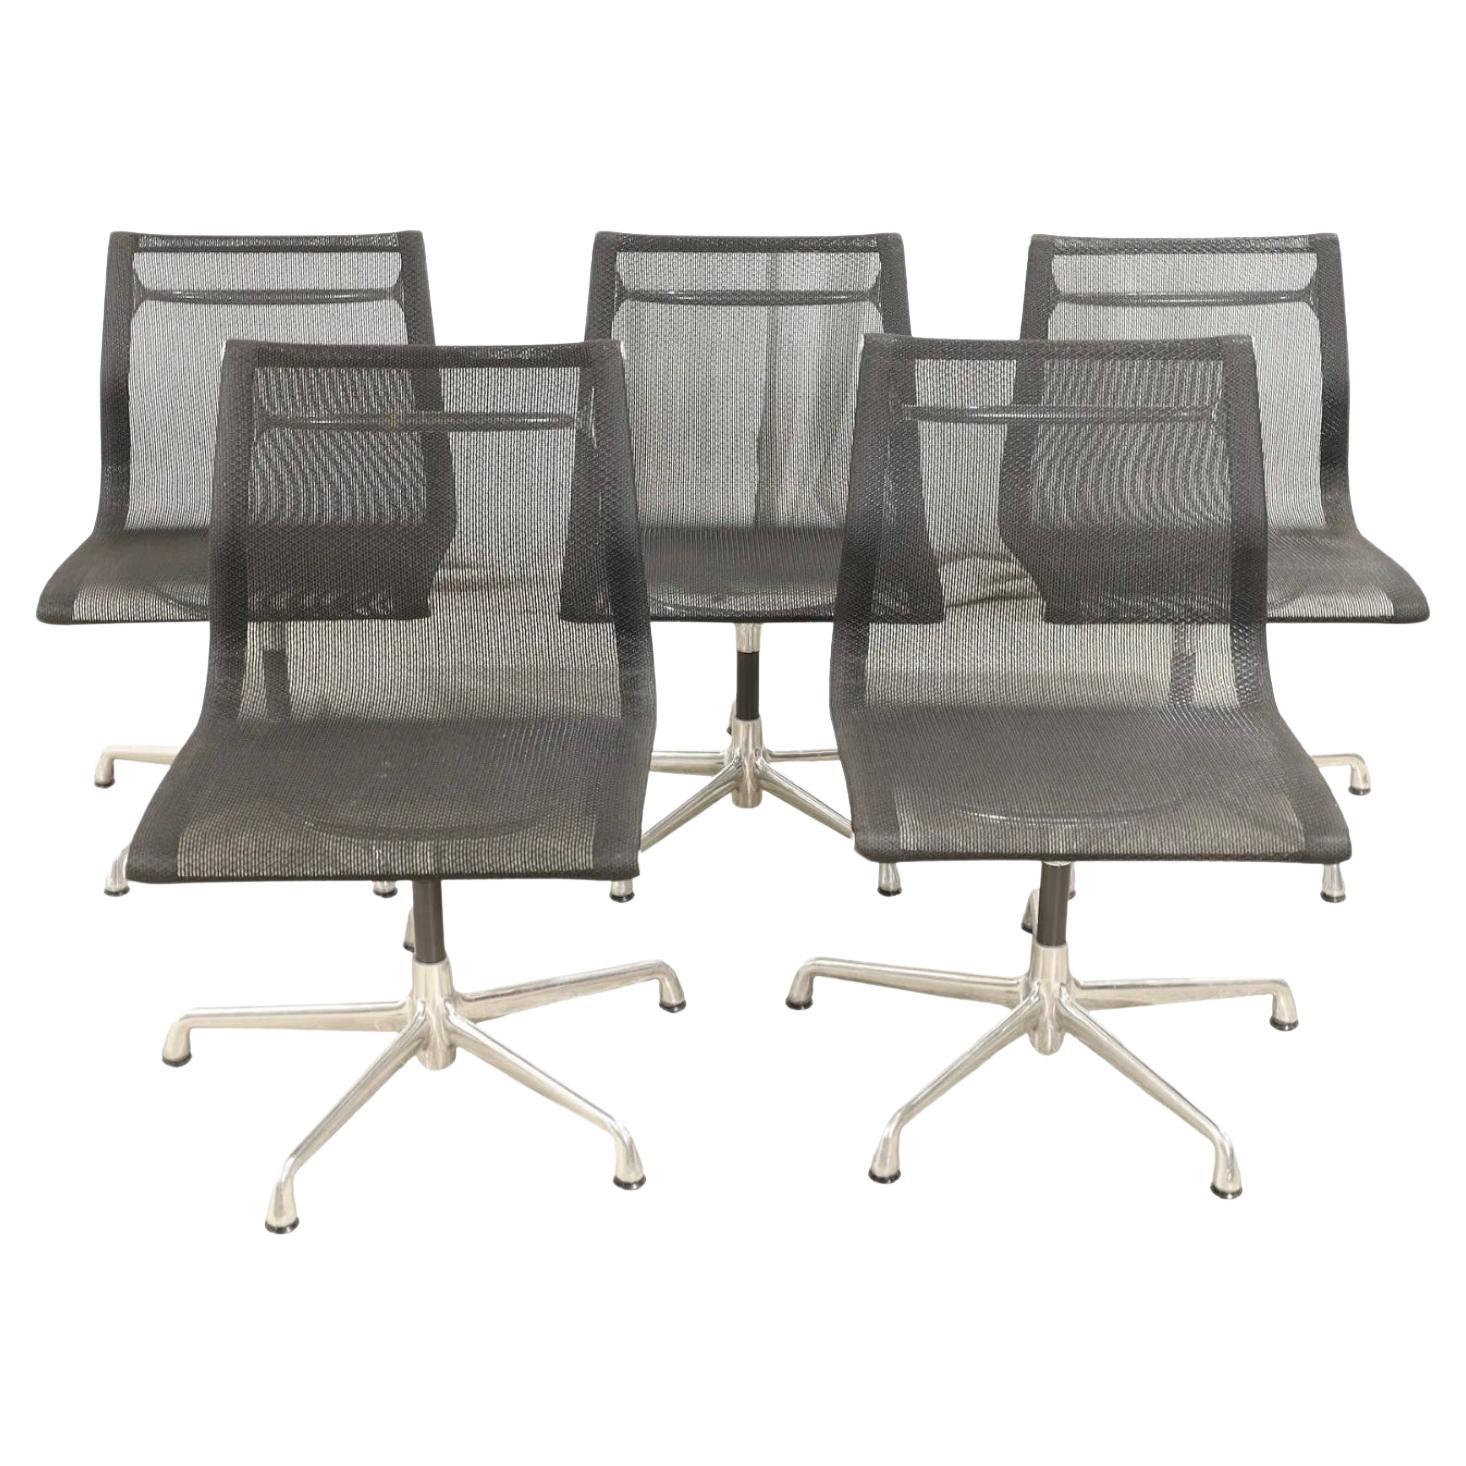 Herman Miller Aluminum Group Side office chair in Mesh by Charles Eames 